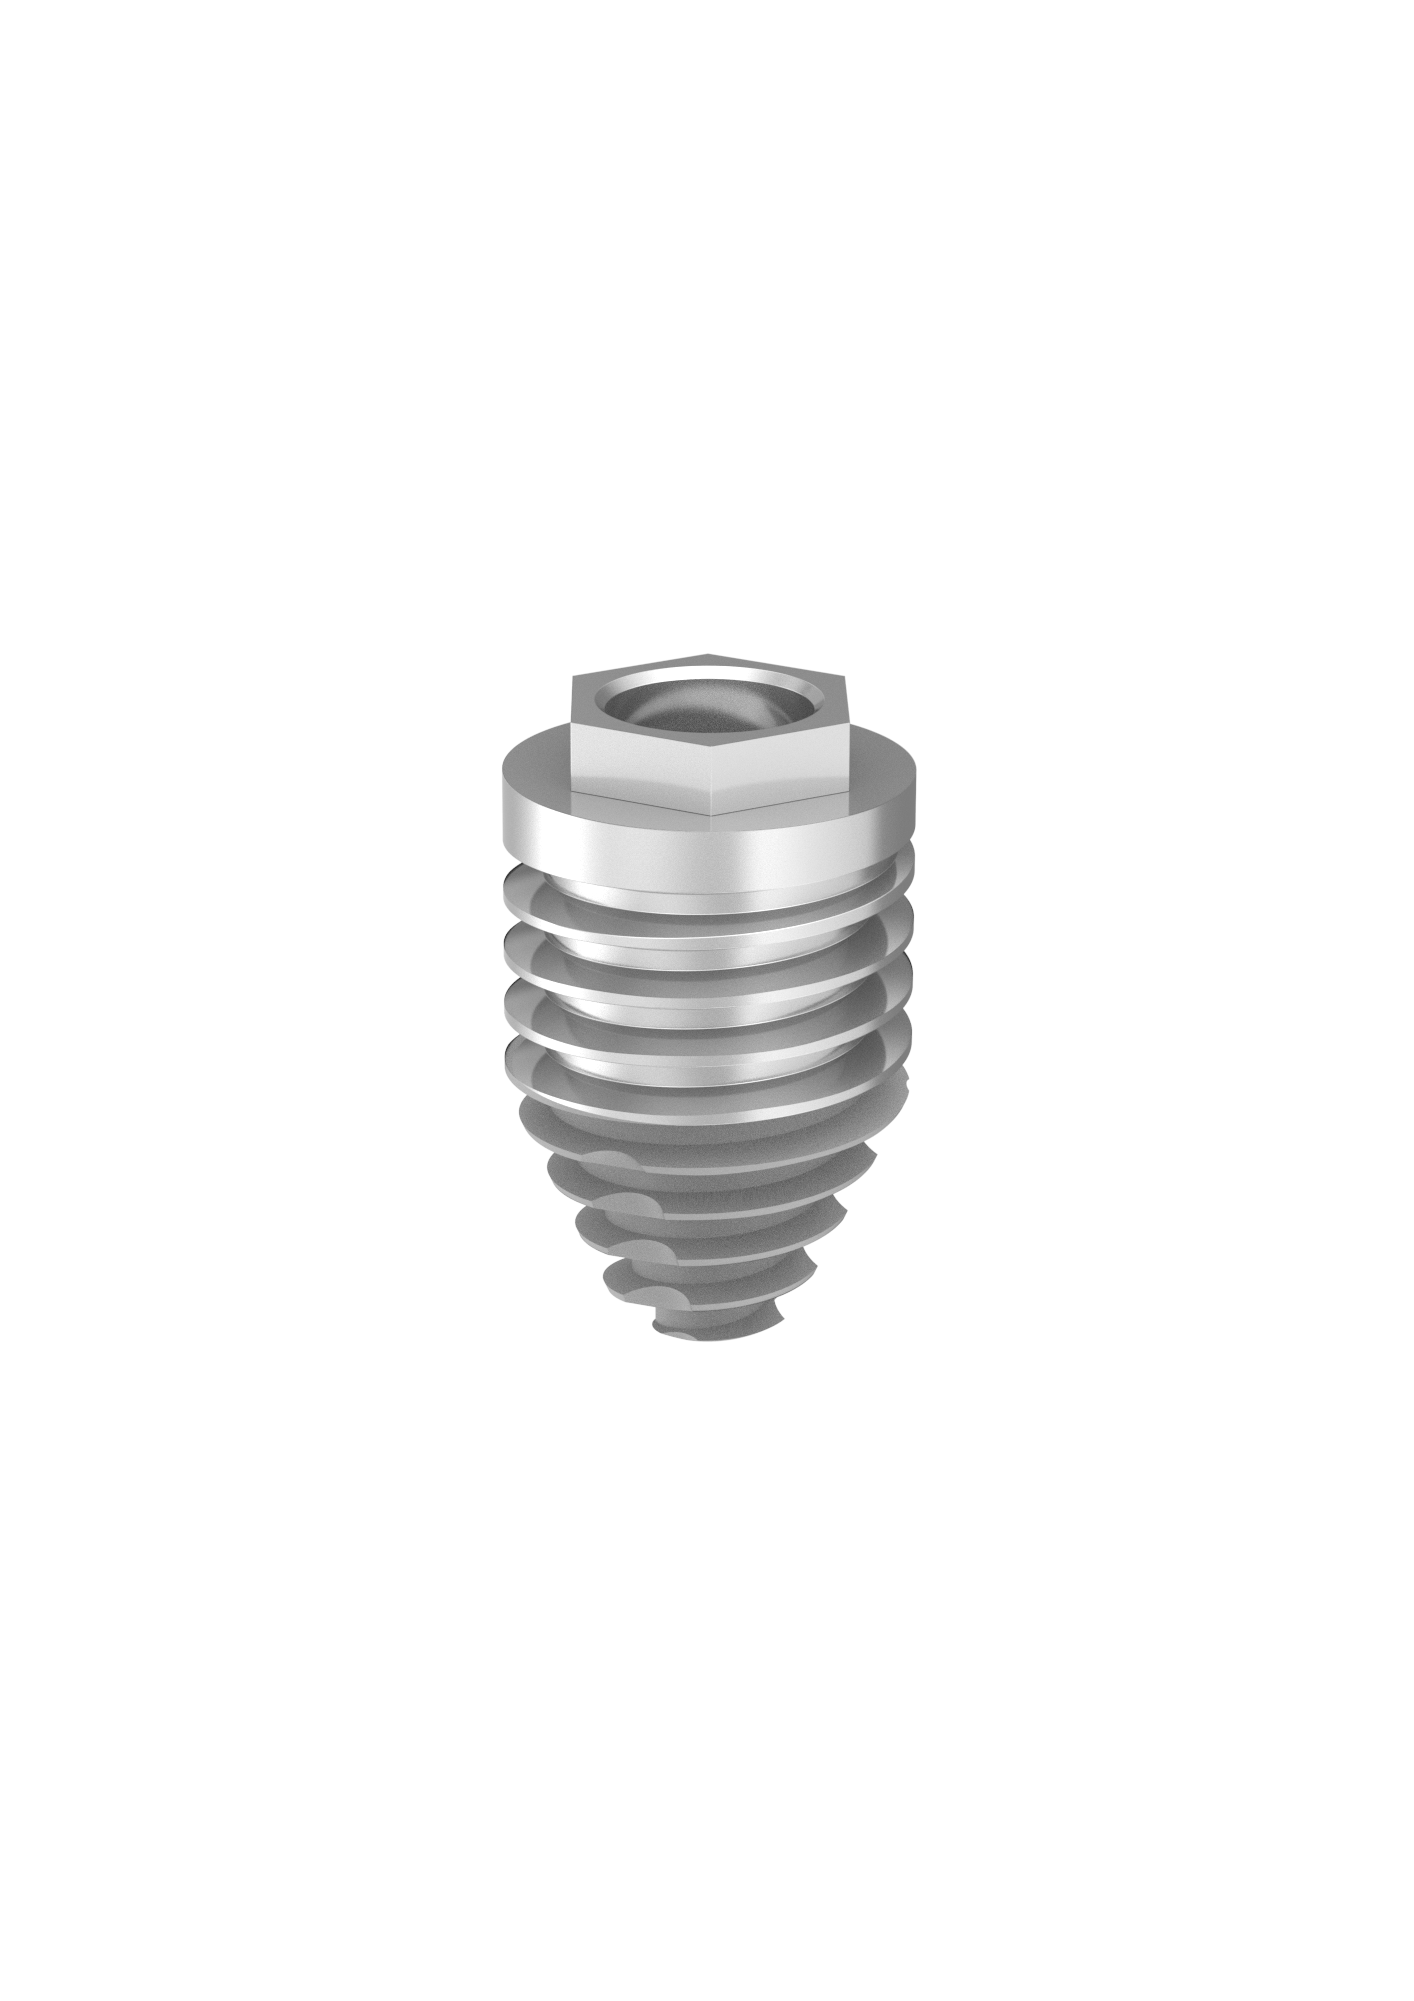 MSC Ex-Hex Tapered Implant 4.0mm x 6mm